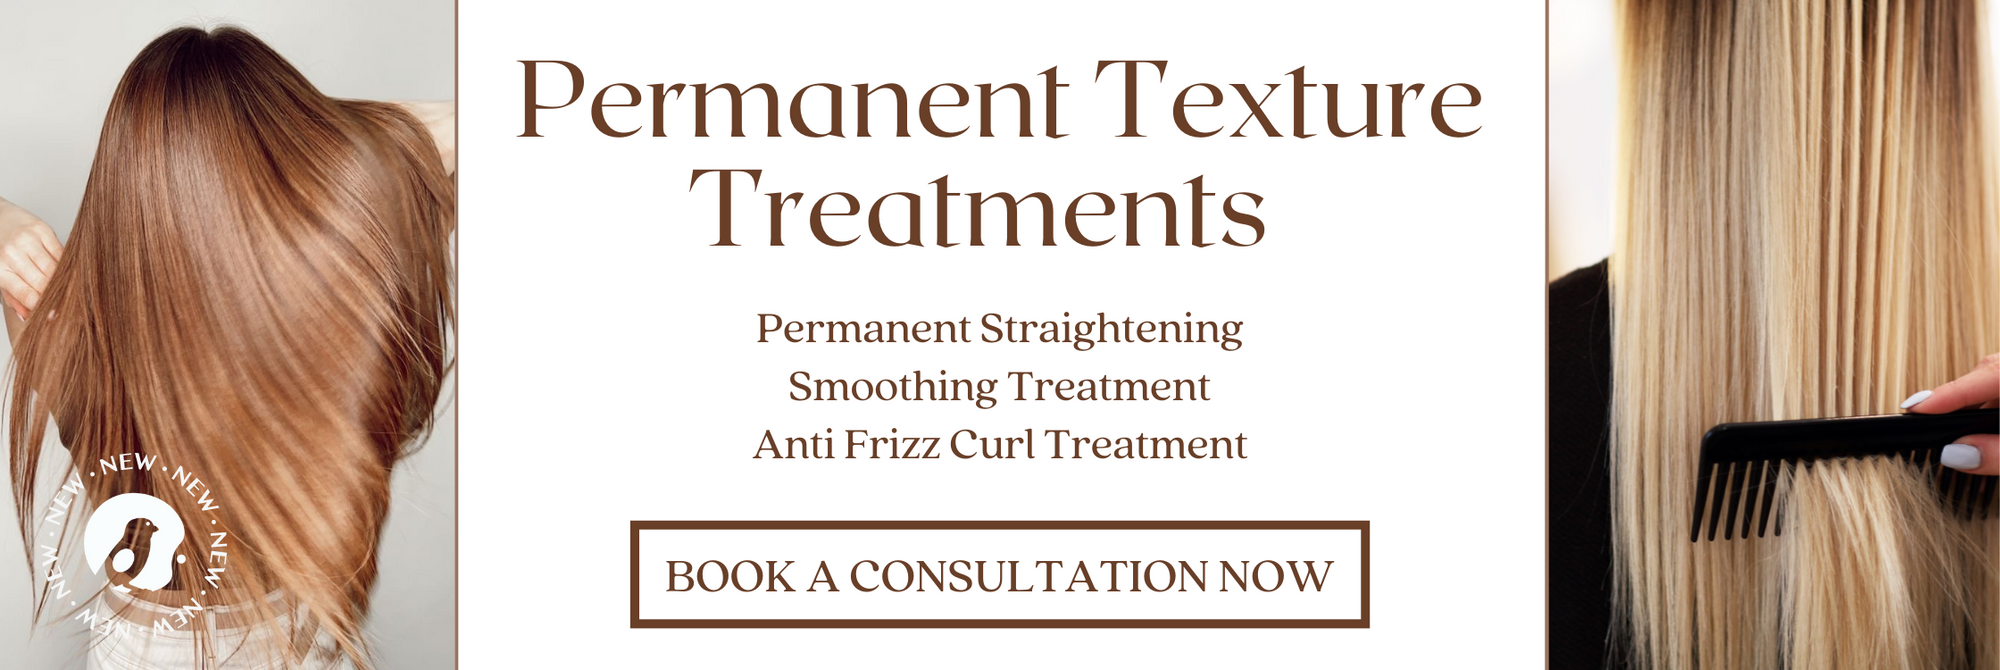 Permanent Texture Treatments - Permanent Straightening, Smoothing Treatment, Anti Frizz Curl Treatment - Book a Consultation Now button - Salon Society Bird Icon